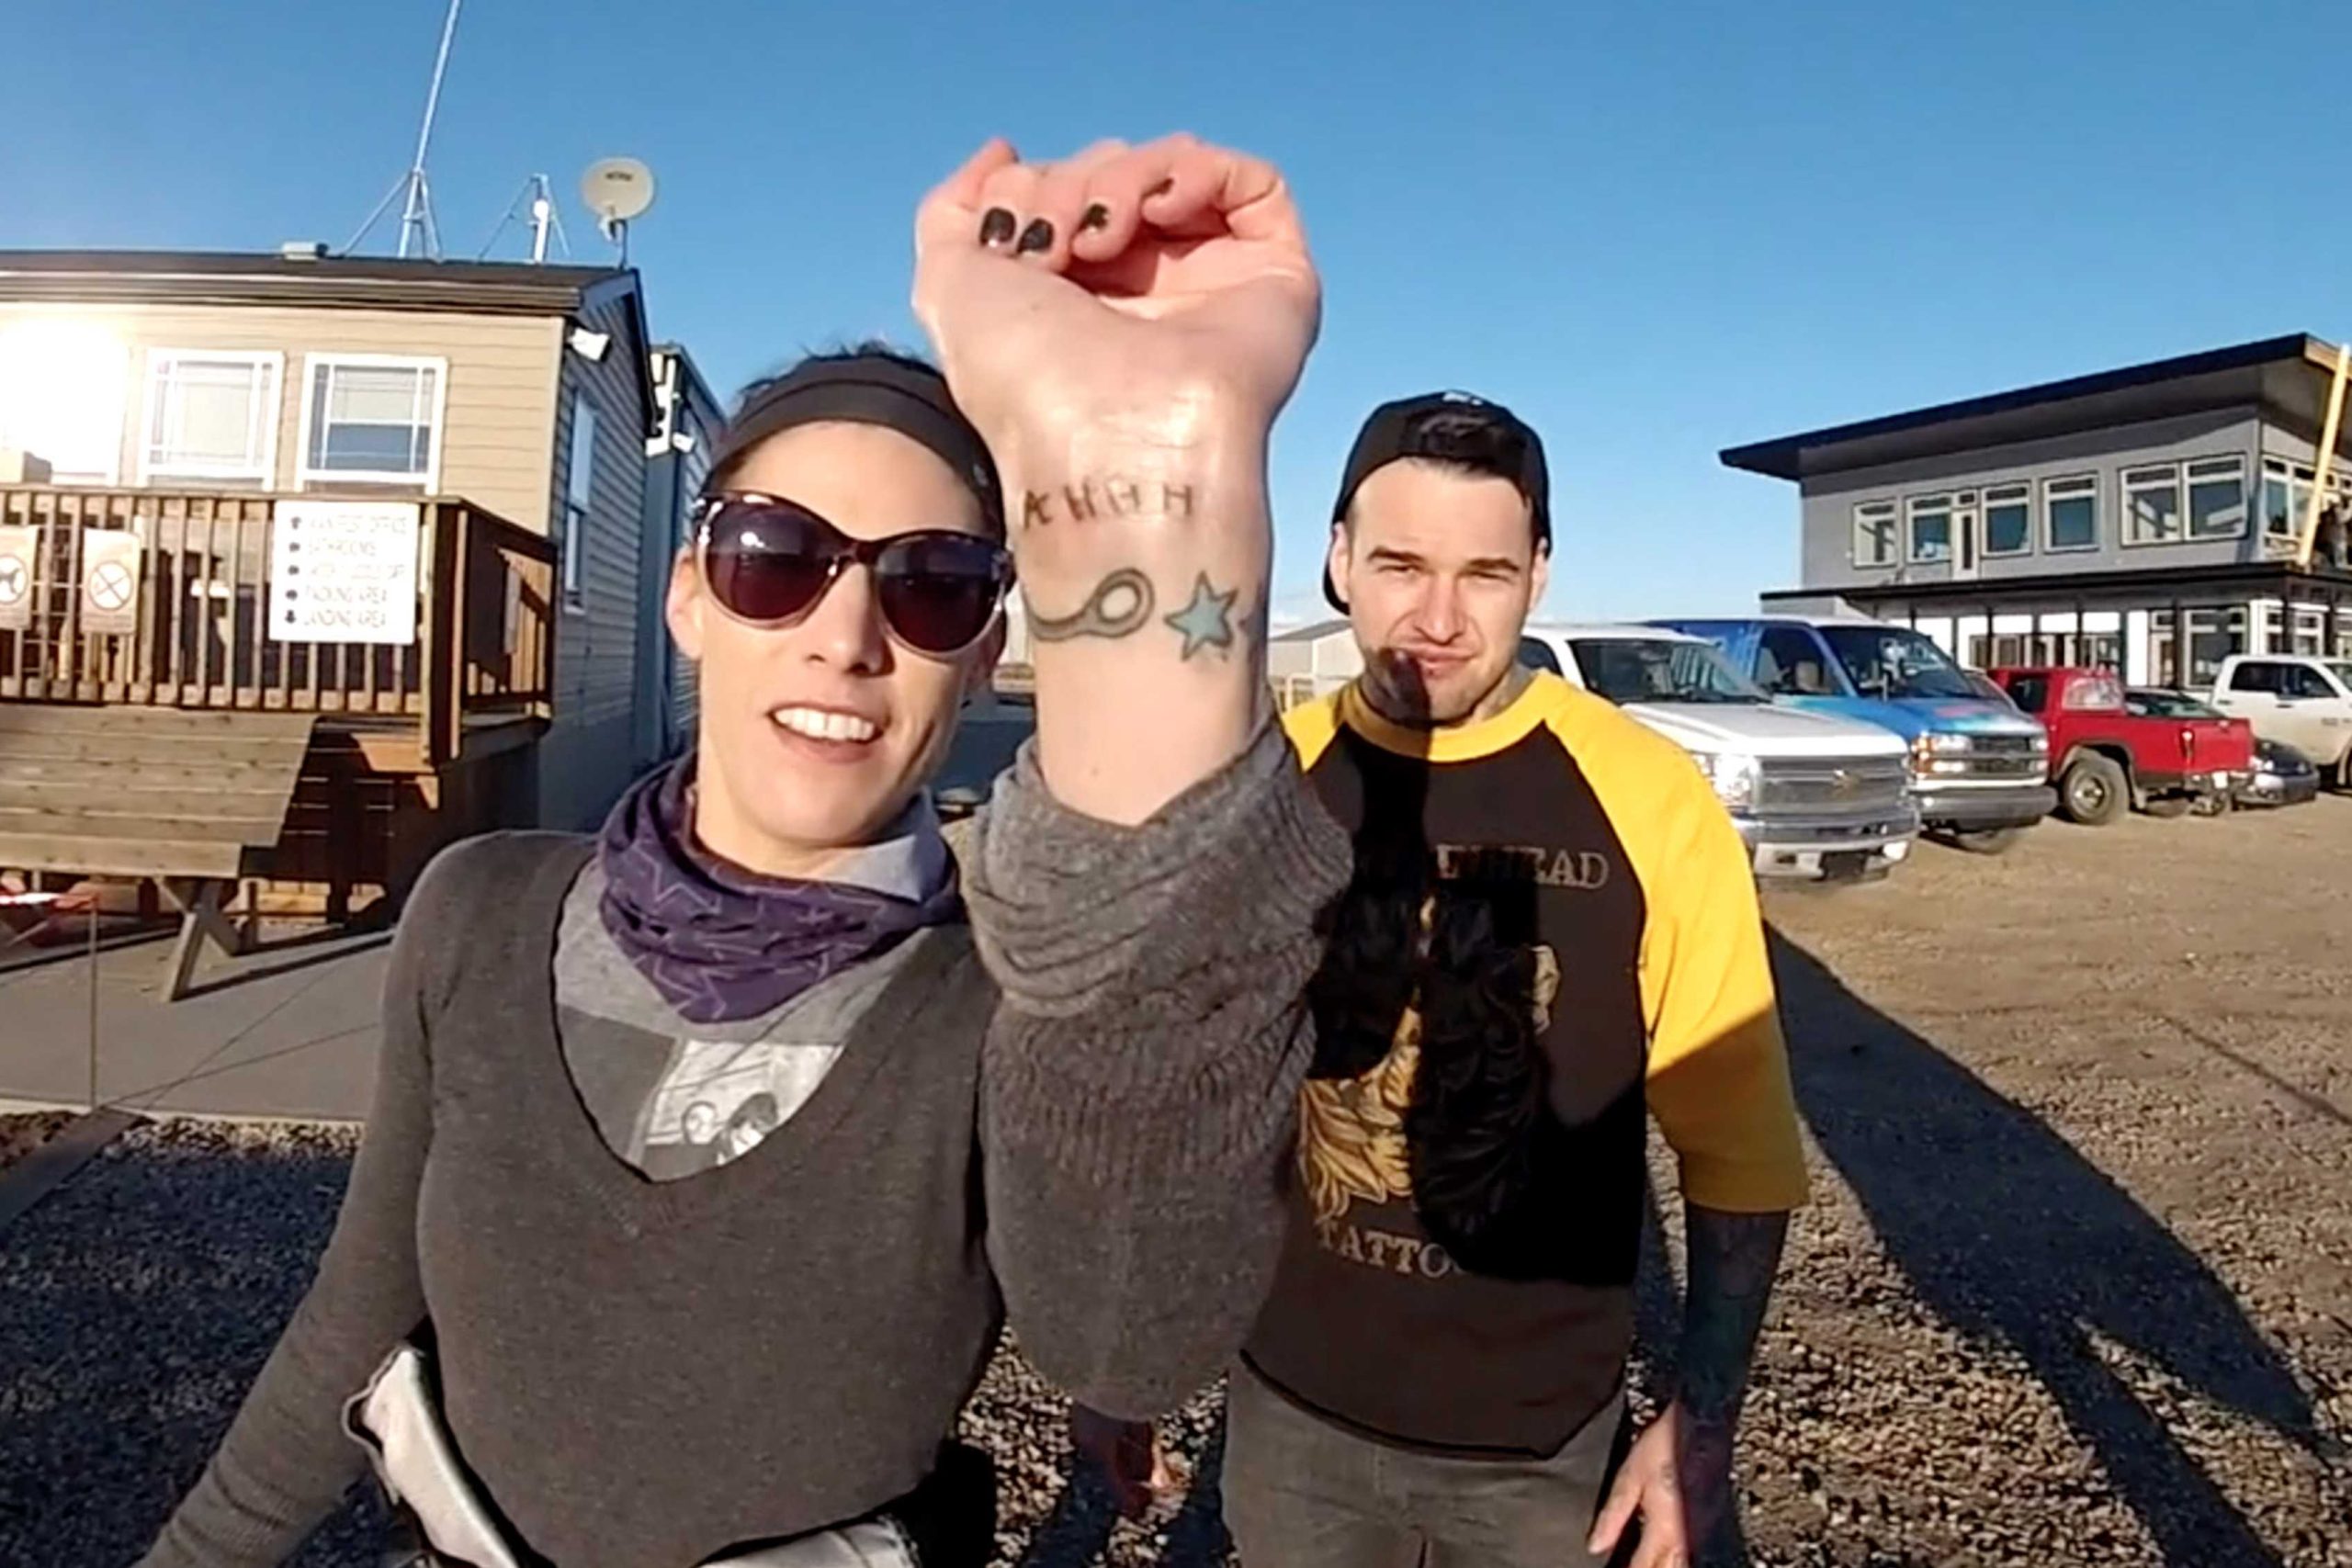 Woman gets tattoo while skydiving